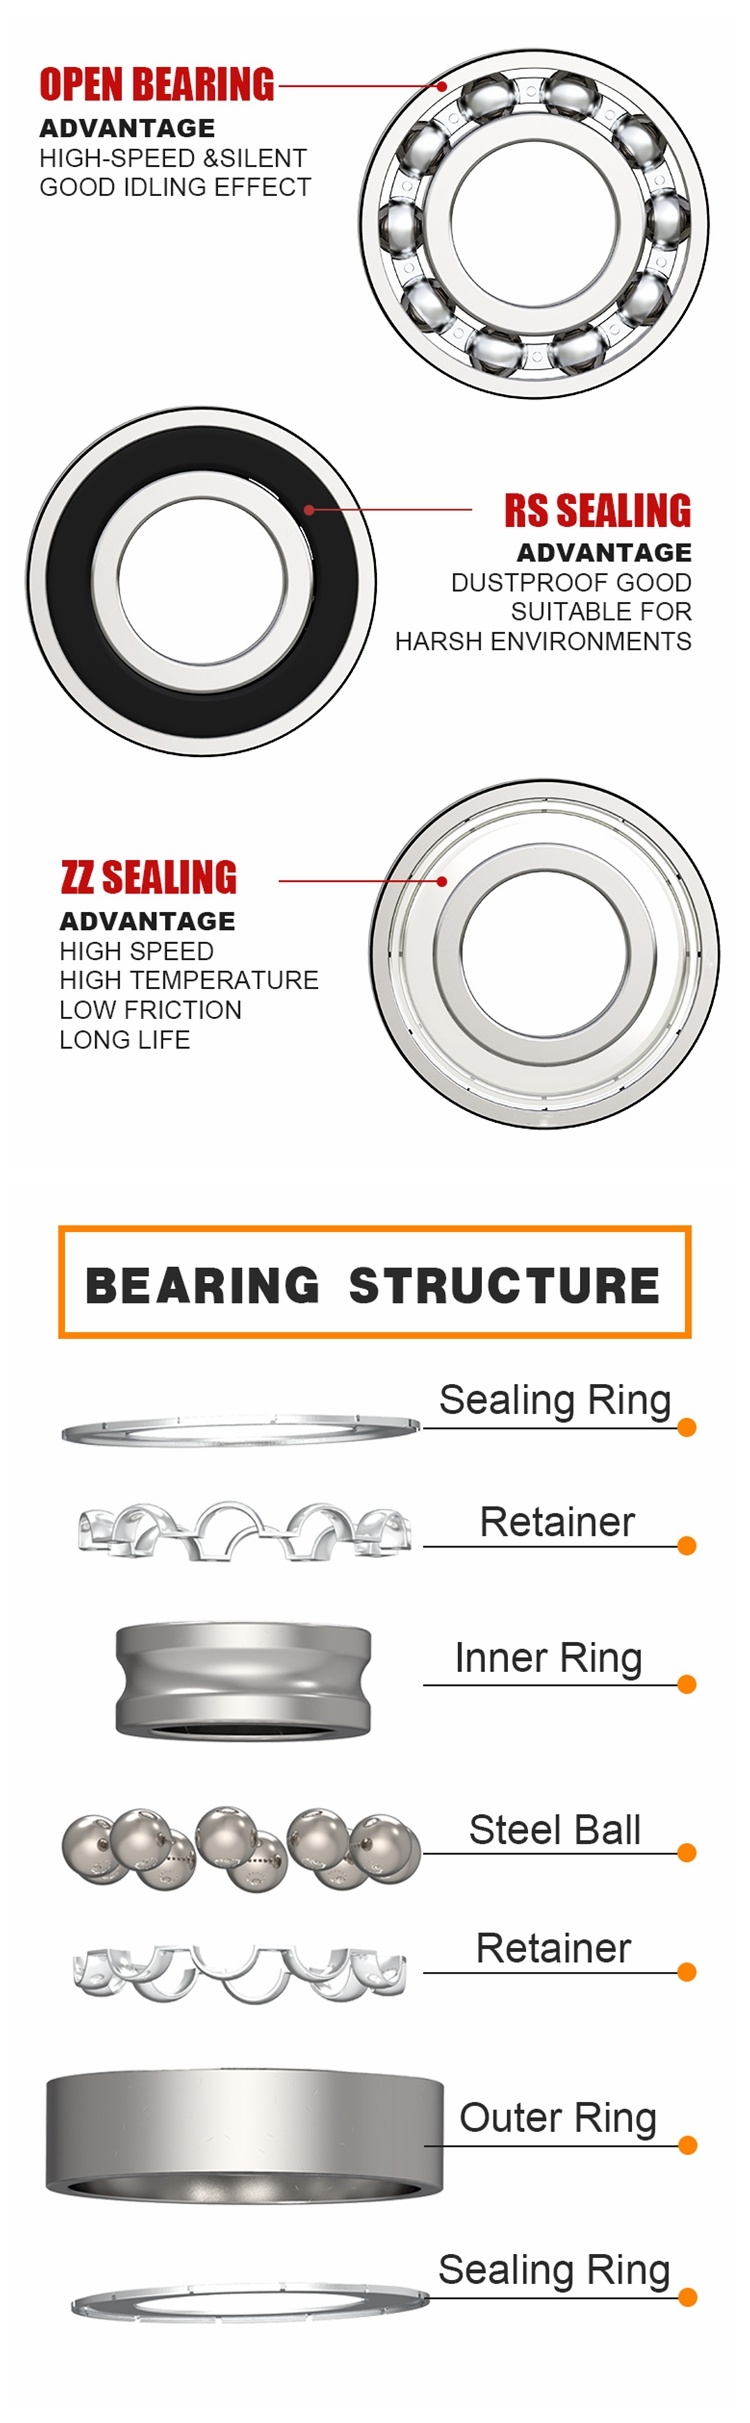 ABEC-1 Spindle Bearing Z1 V1 686 RS Deep Groove Ball Bearings